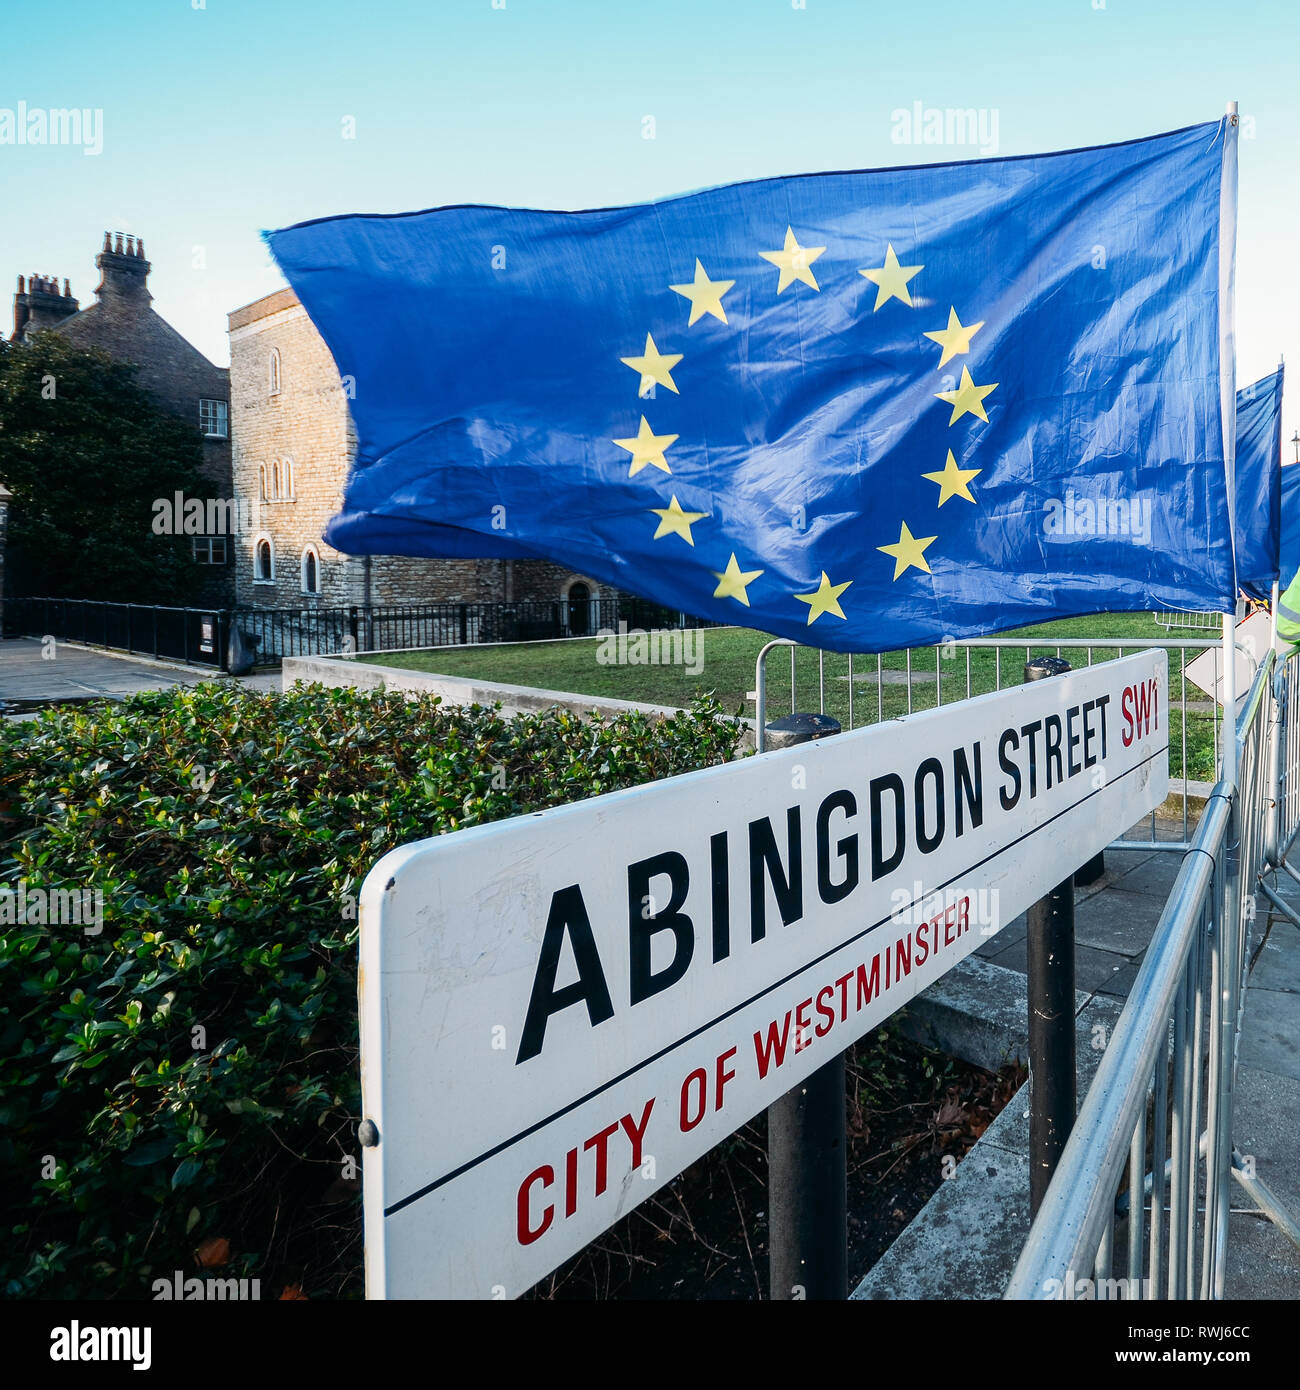 Abingdon Street in Westminster, London with EU flag in protest against Brexit. Stock Photo